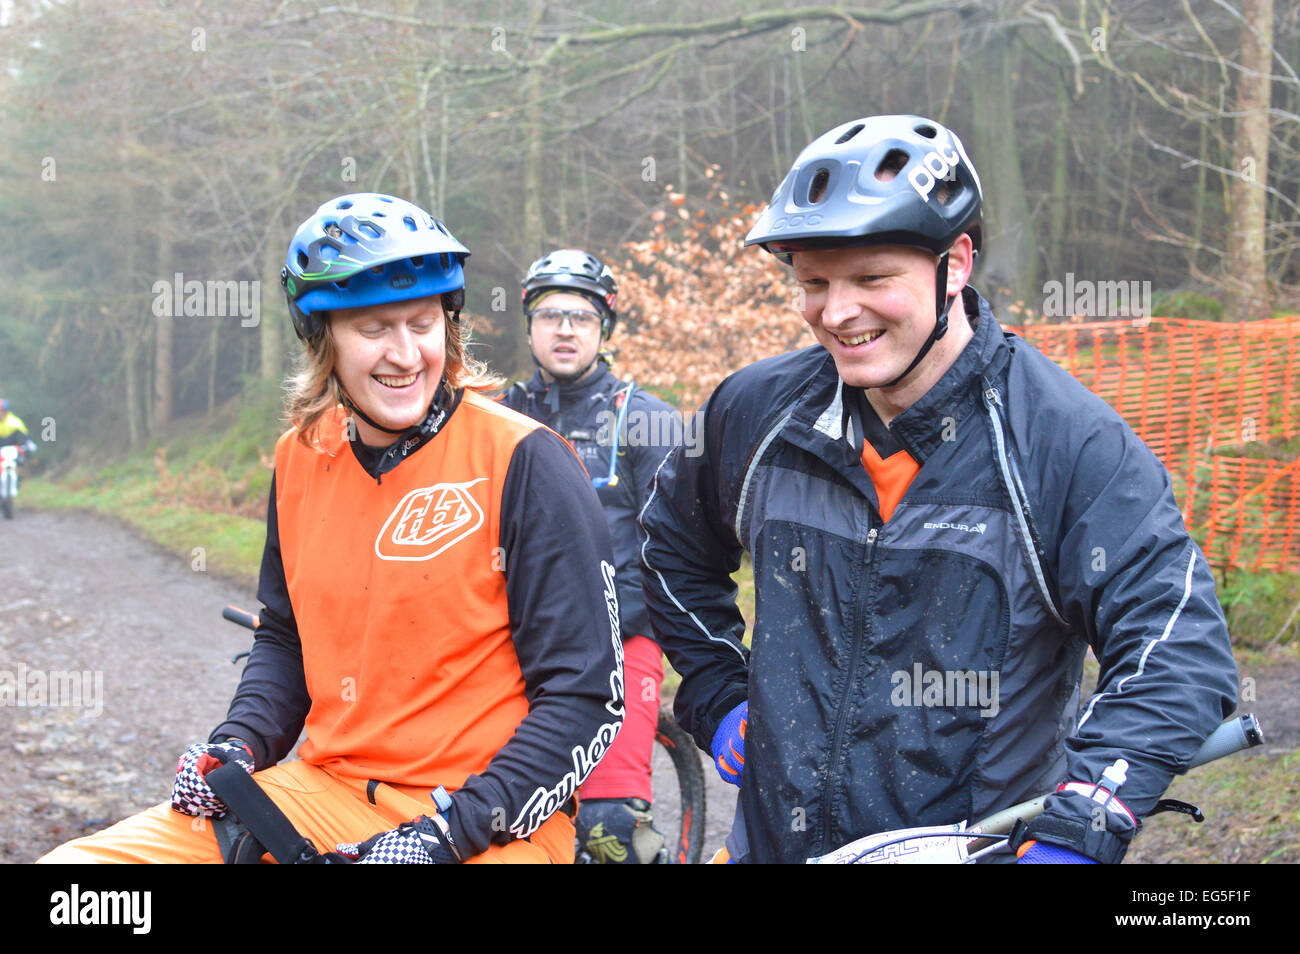 Riders during practice for an MTB enduro event in Hamsterley Forest, Co Durham. Stock Photo